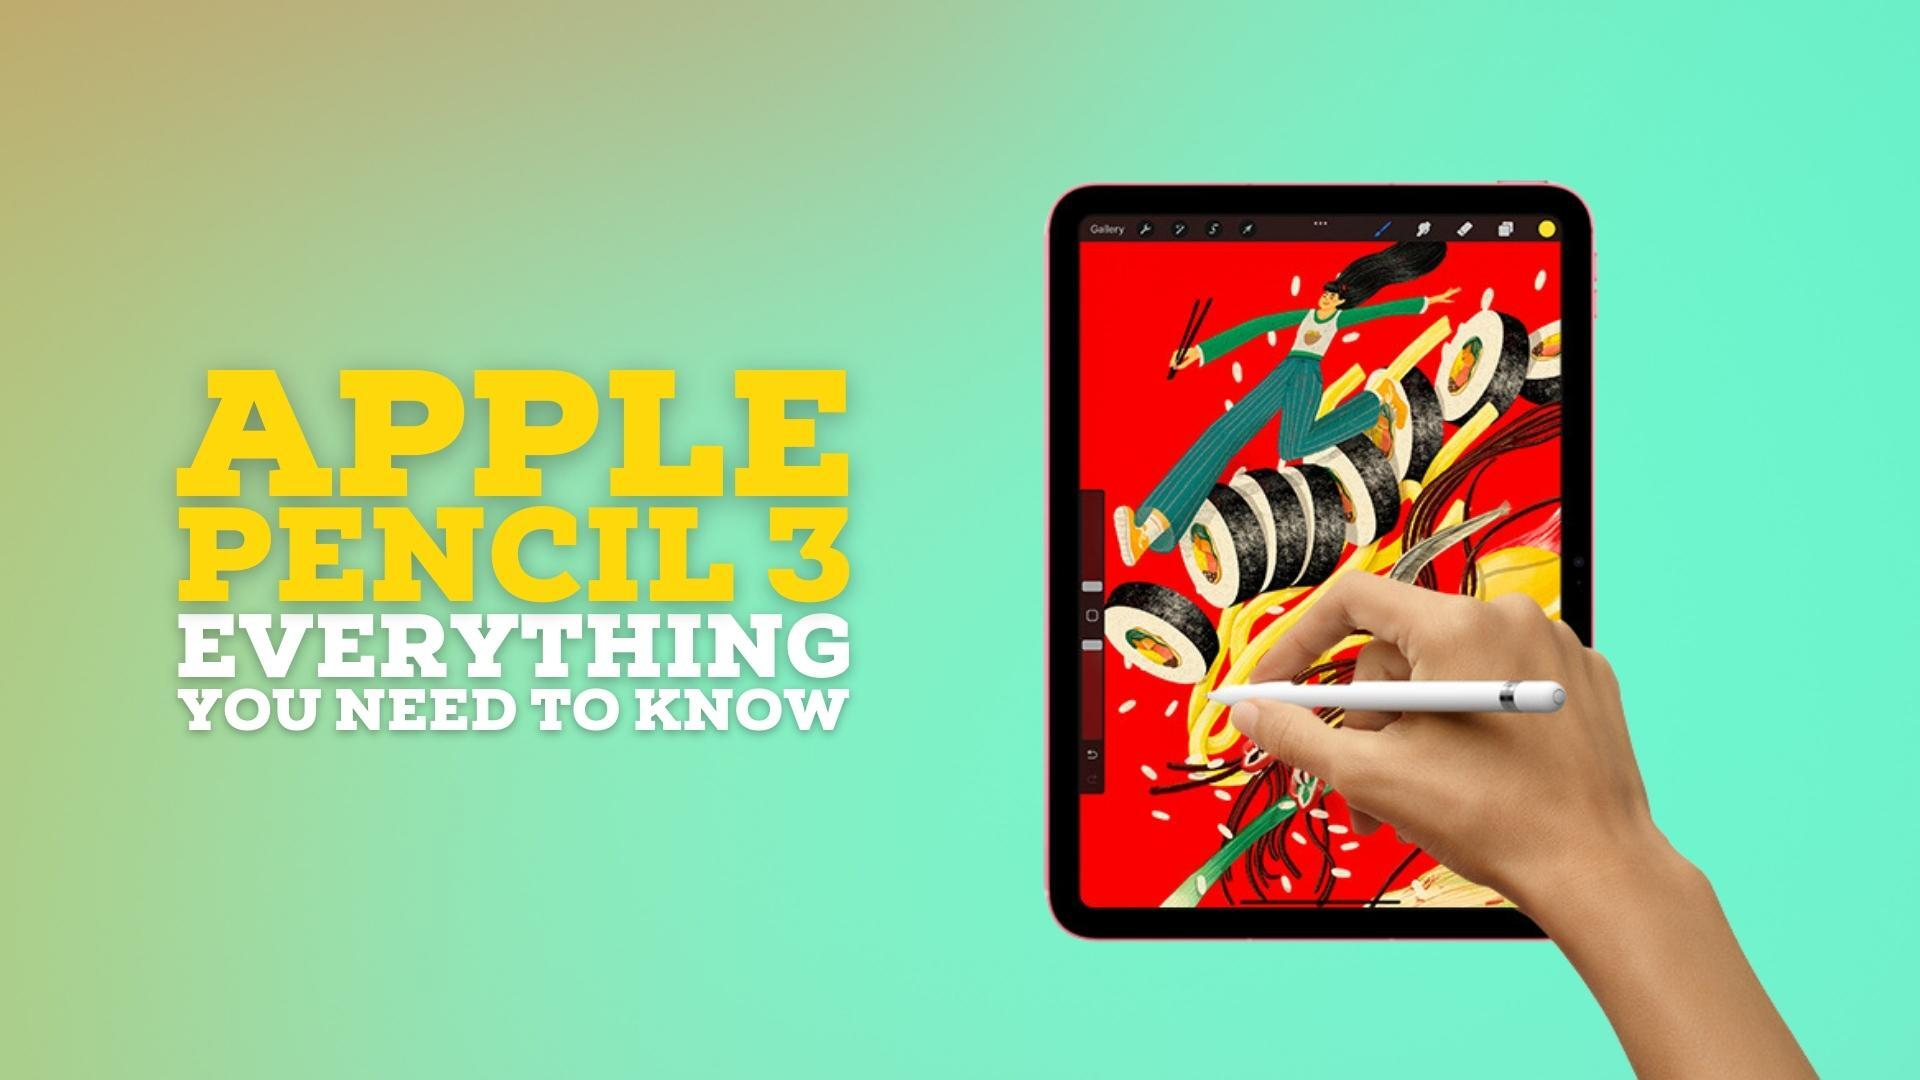 Apple Pencil 3: Everything you need to know | iMore